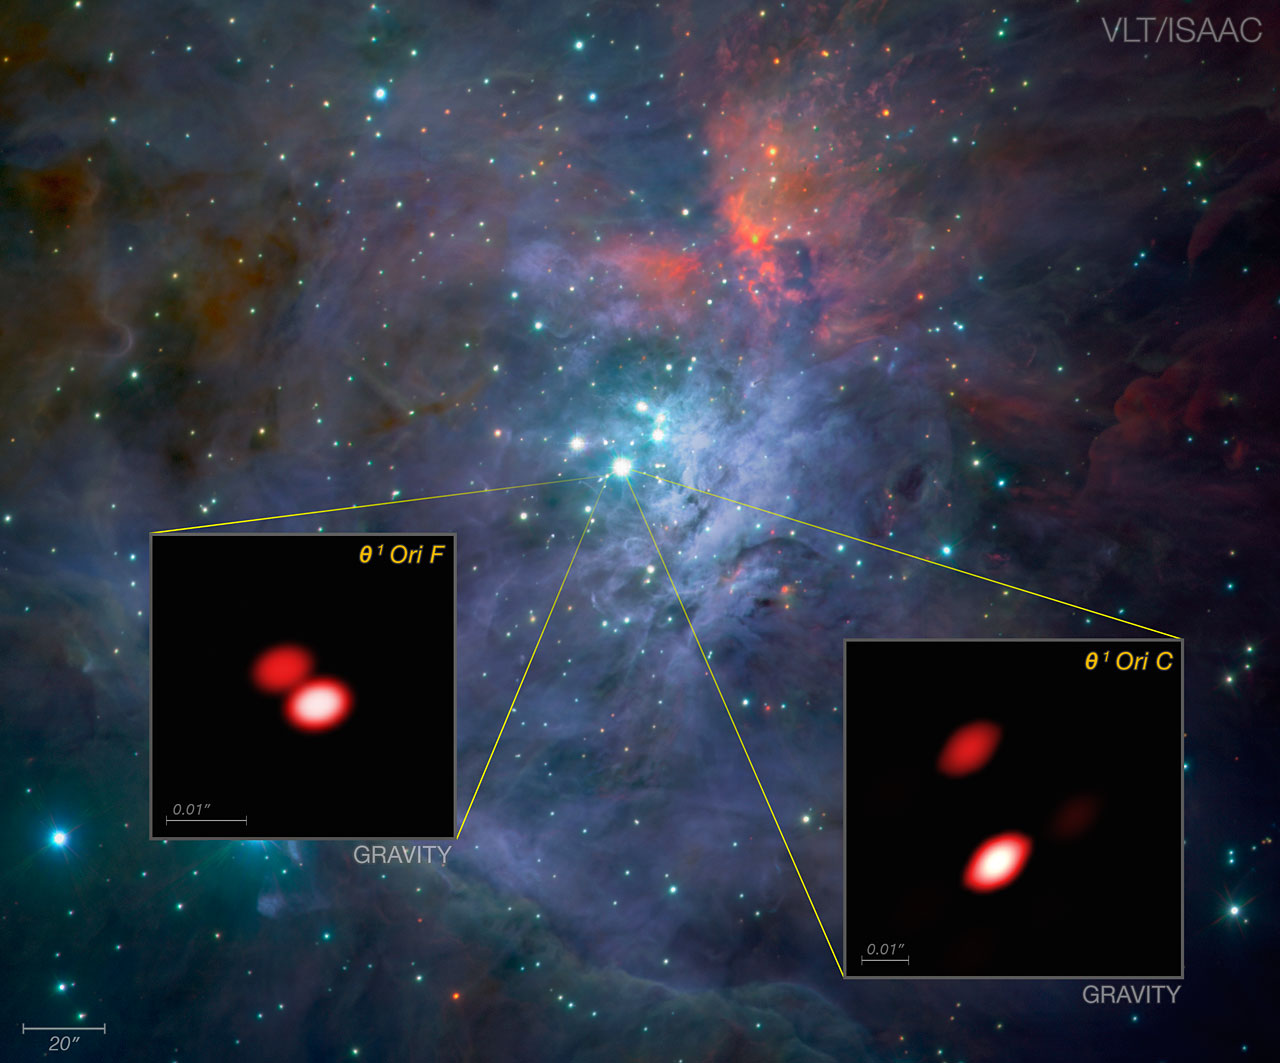 GRAVITY discovers new double star in the Orion Trapezium Cluster